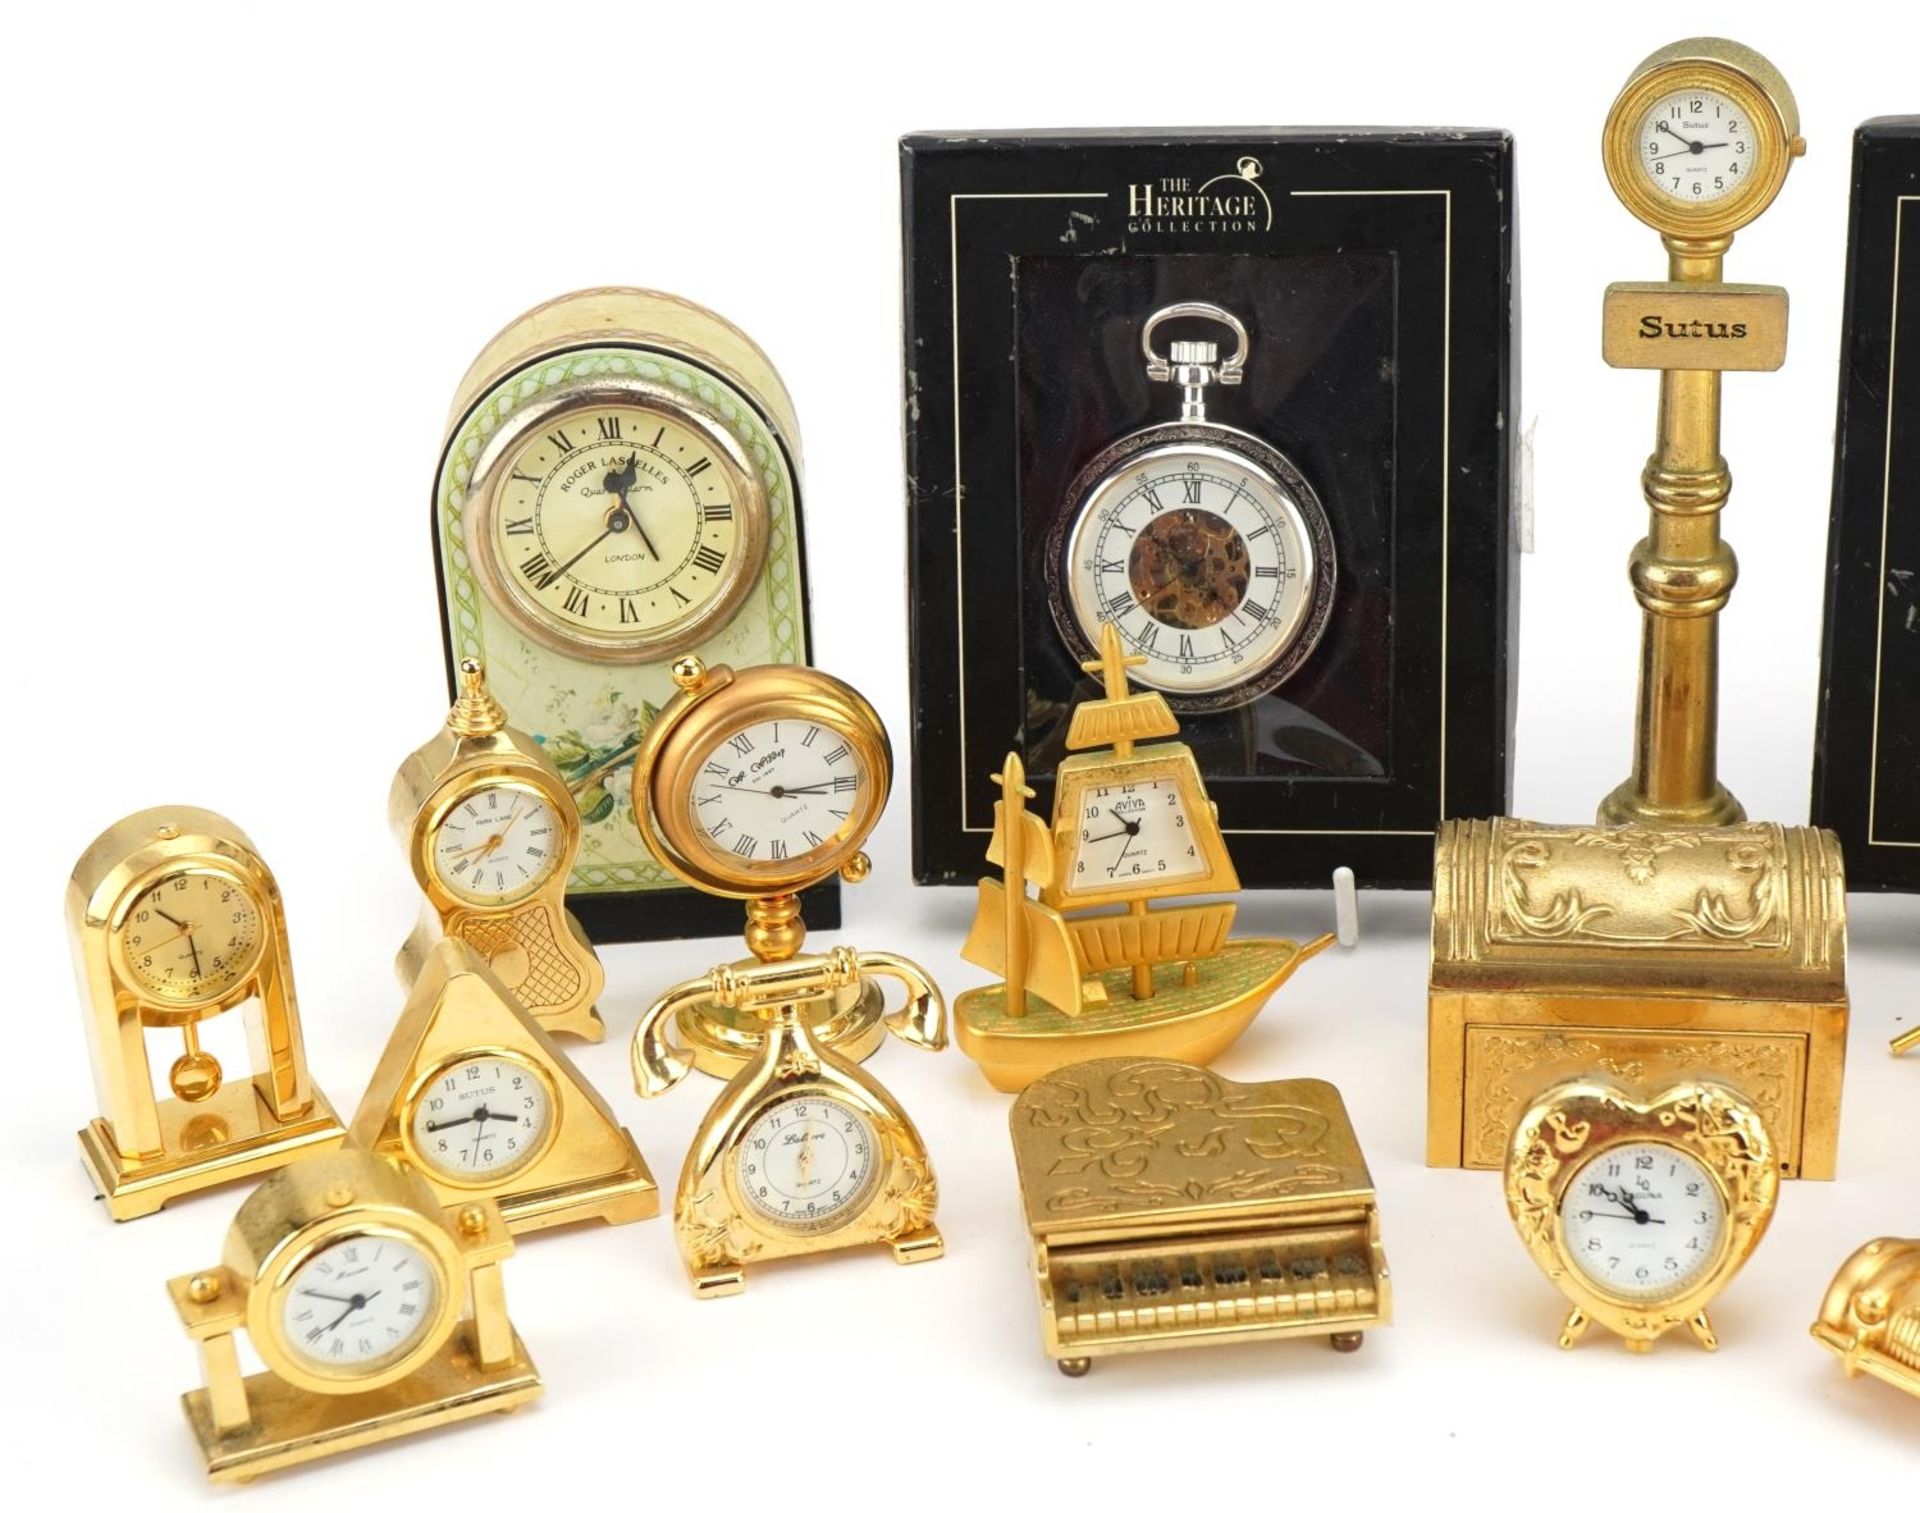 Collection of miniature novelty brass clocks and pocket watches including drum kit, piano and - Image 2 of 3